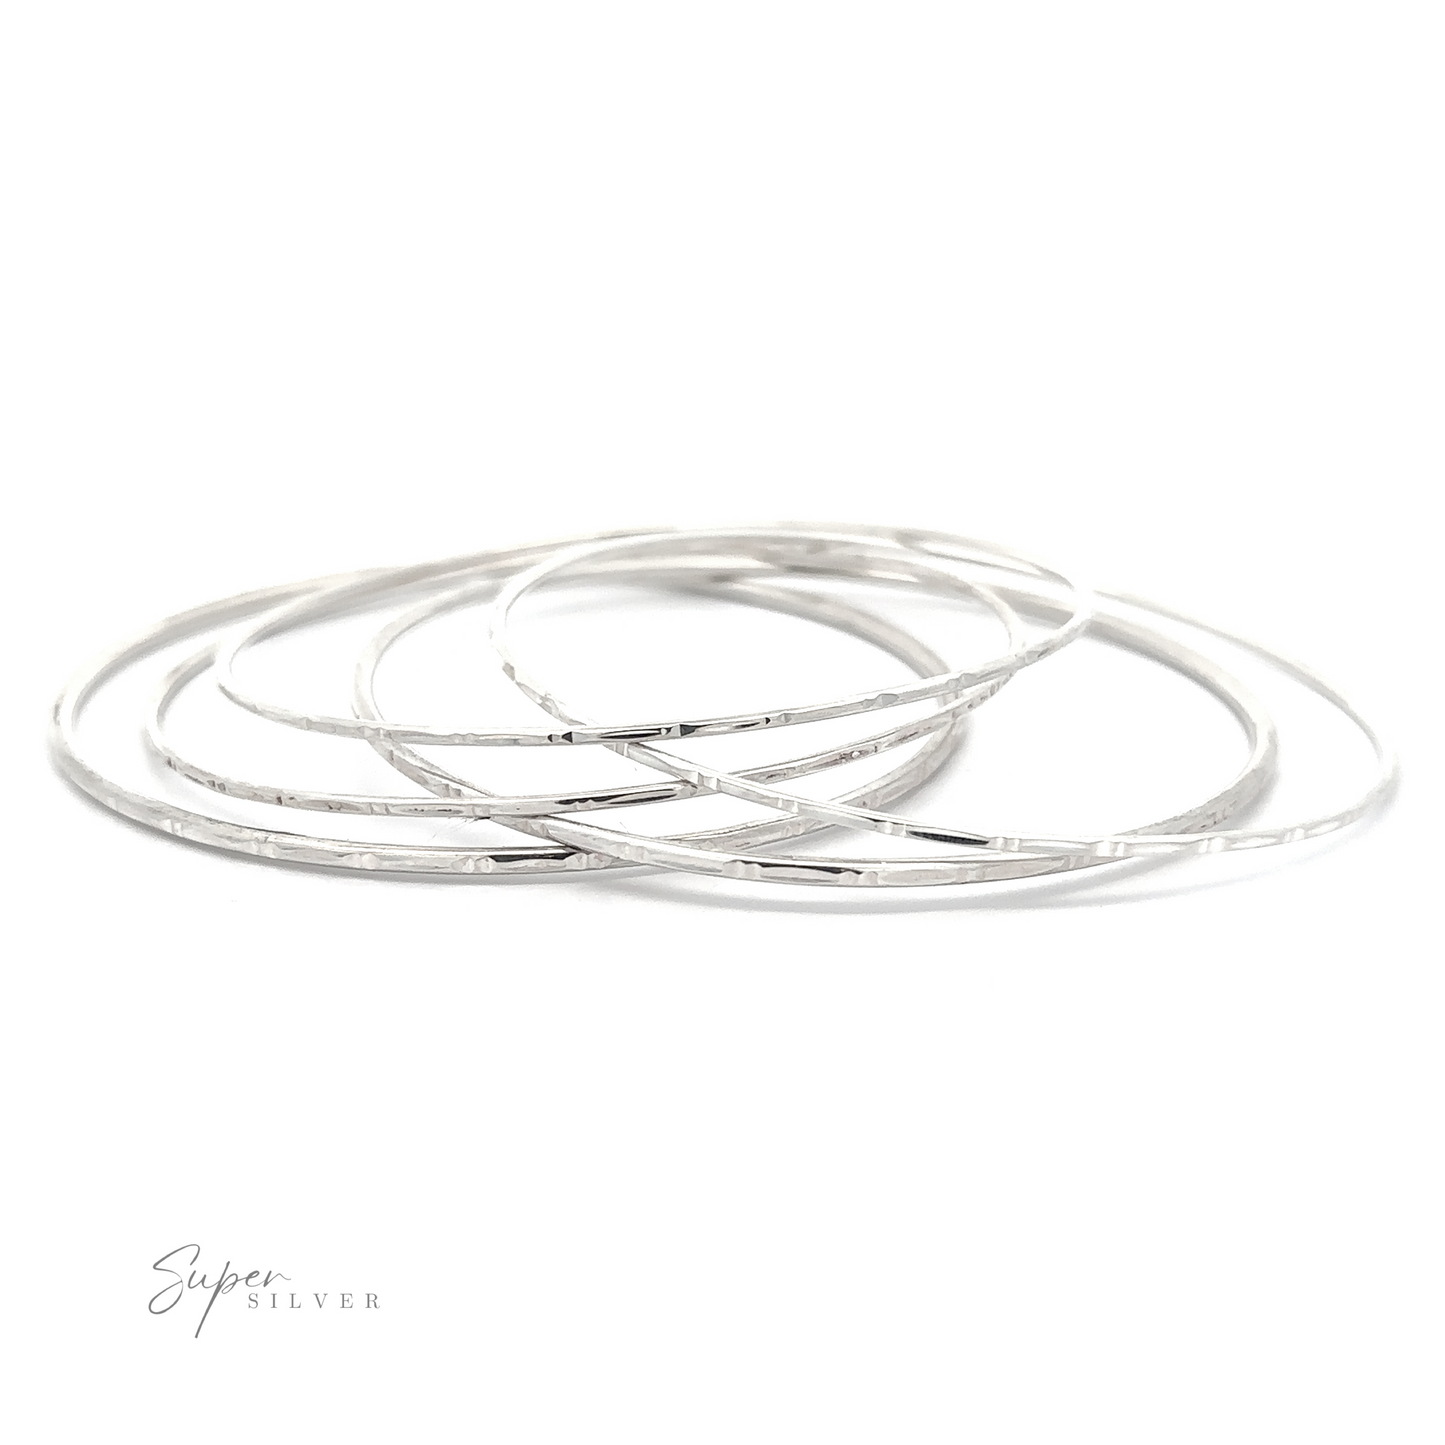 
                  
                    A set of five Sparkling Faceted Bangle Bracelets arranged in an overlapping fashion on a white background. The surface appears smooth and shiny.
                  
                